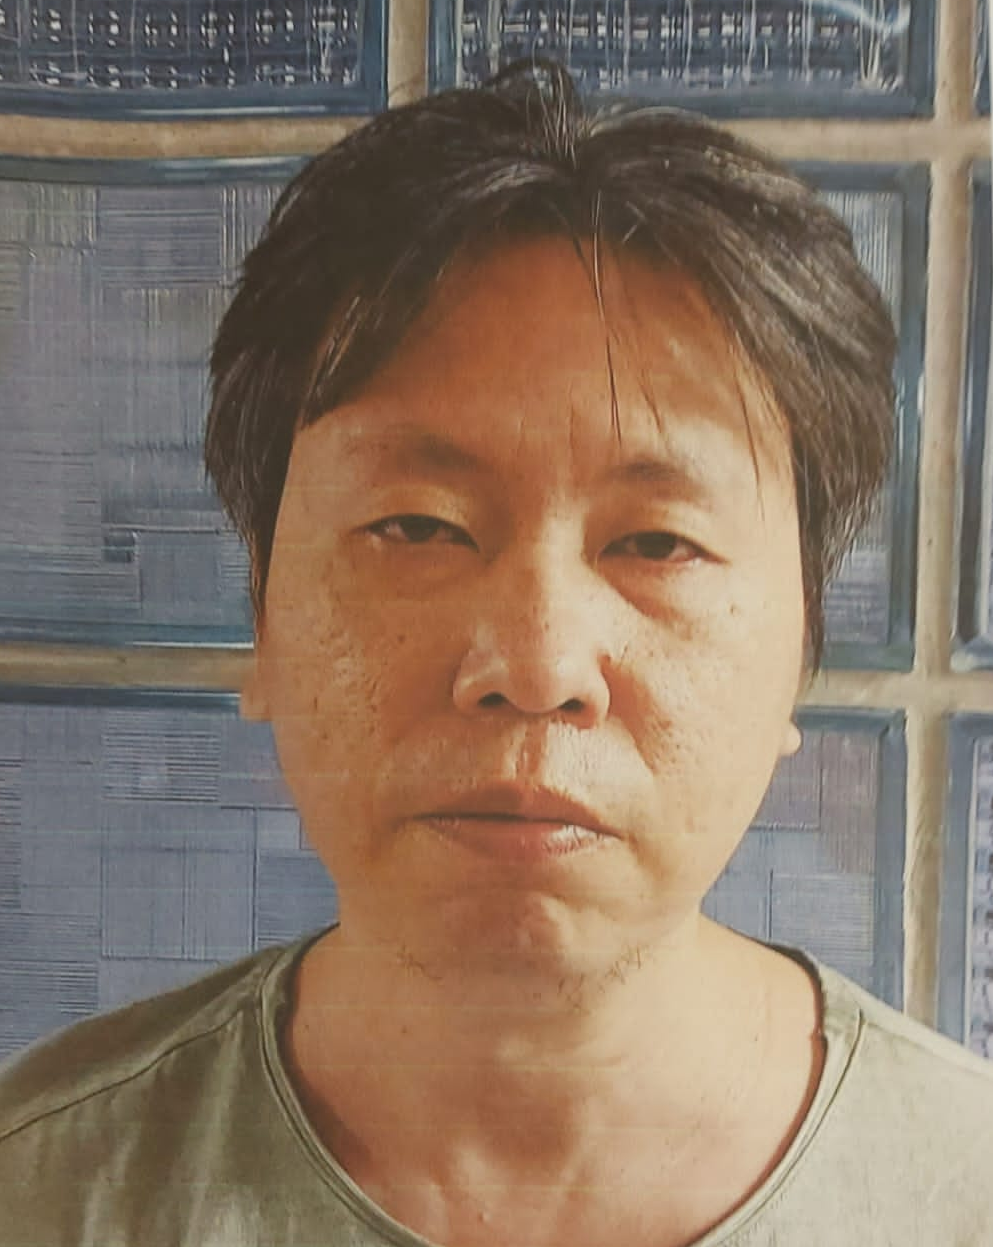 Lei Pui-lam, aged 51,  is about 1.65 metres tall, 70 kilograms in weight and of medium build. He has a round face with yellow complexion and short black hair. He was last seen wearing a black and grey short-sleeved shirt, black trousers and dark-coloured shoes.